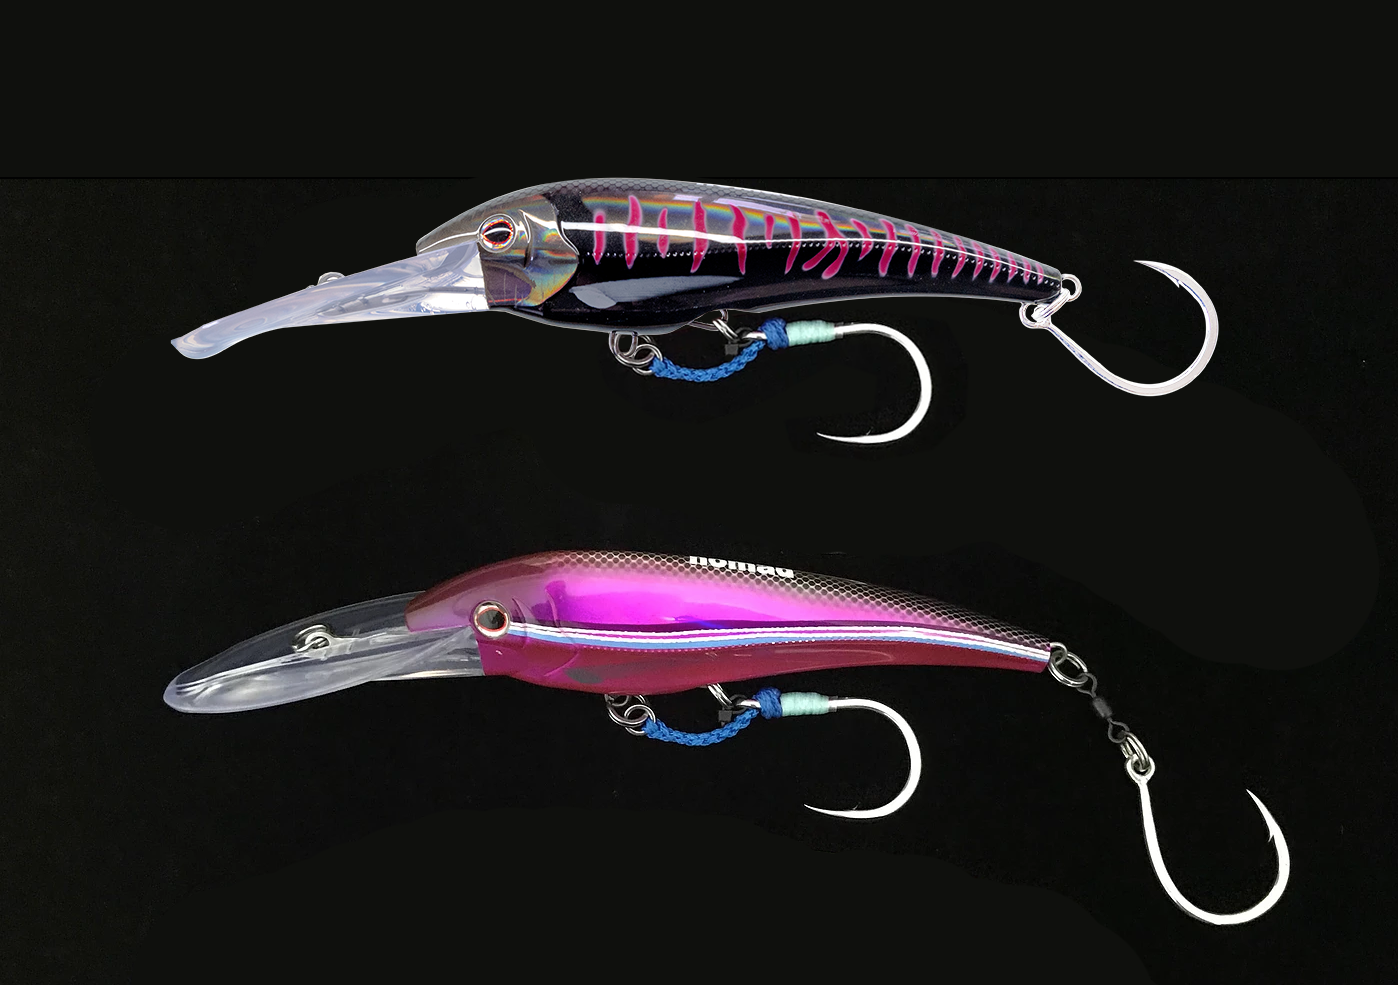 Rigging the Nomad Design DTX Minnow for Marlin & Tuna — Nomad